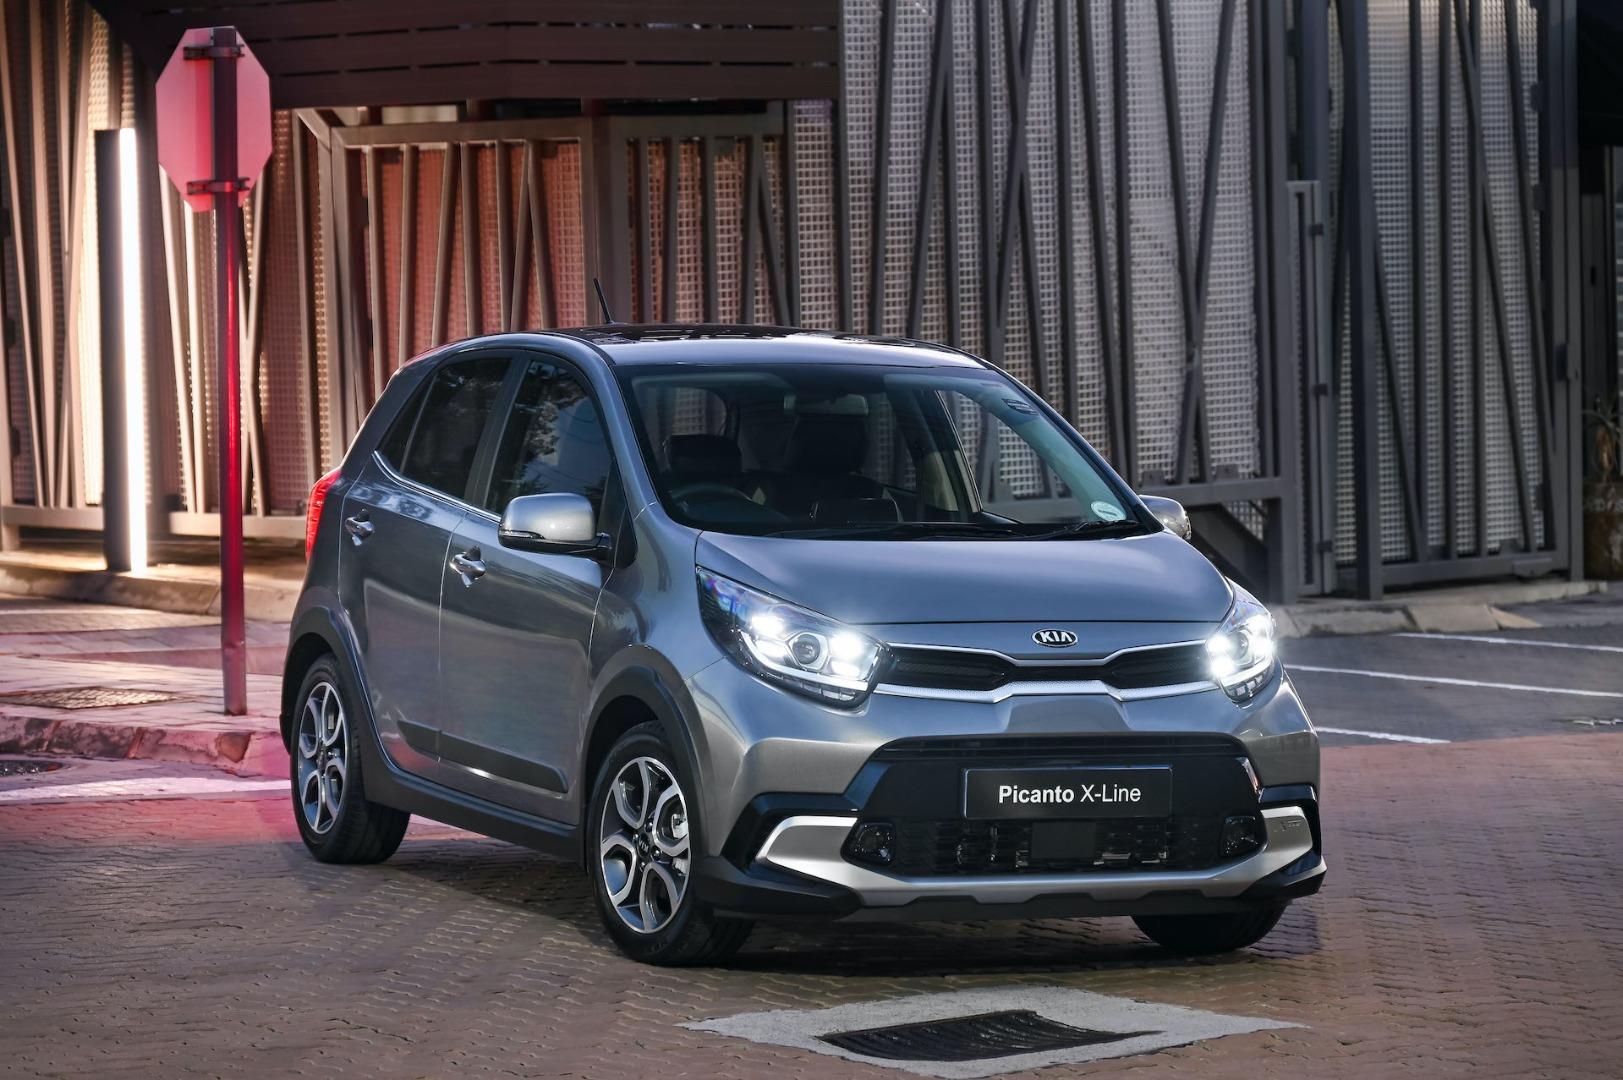 Picanto - how Kia stays big in small cars - Just Auto